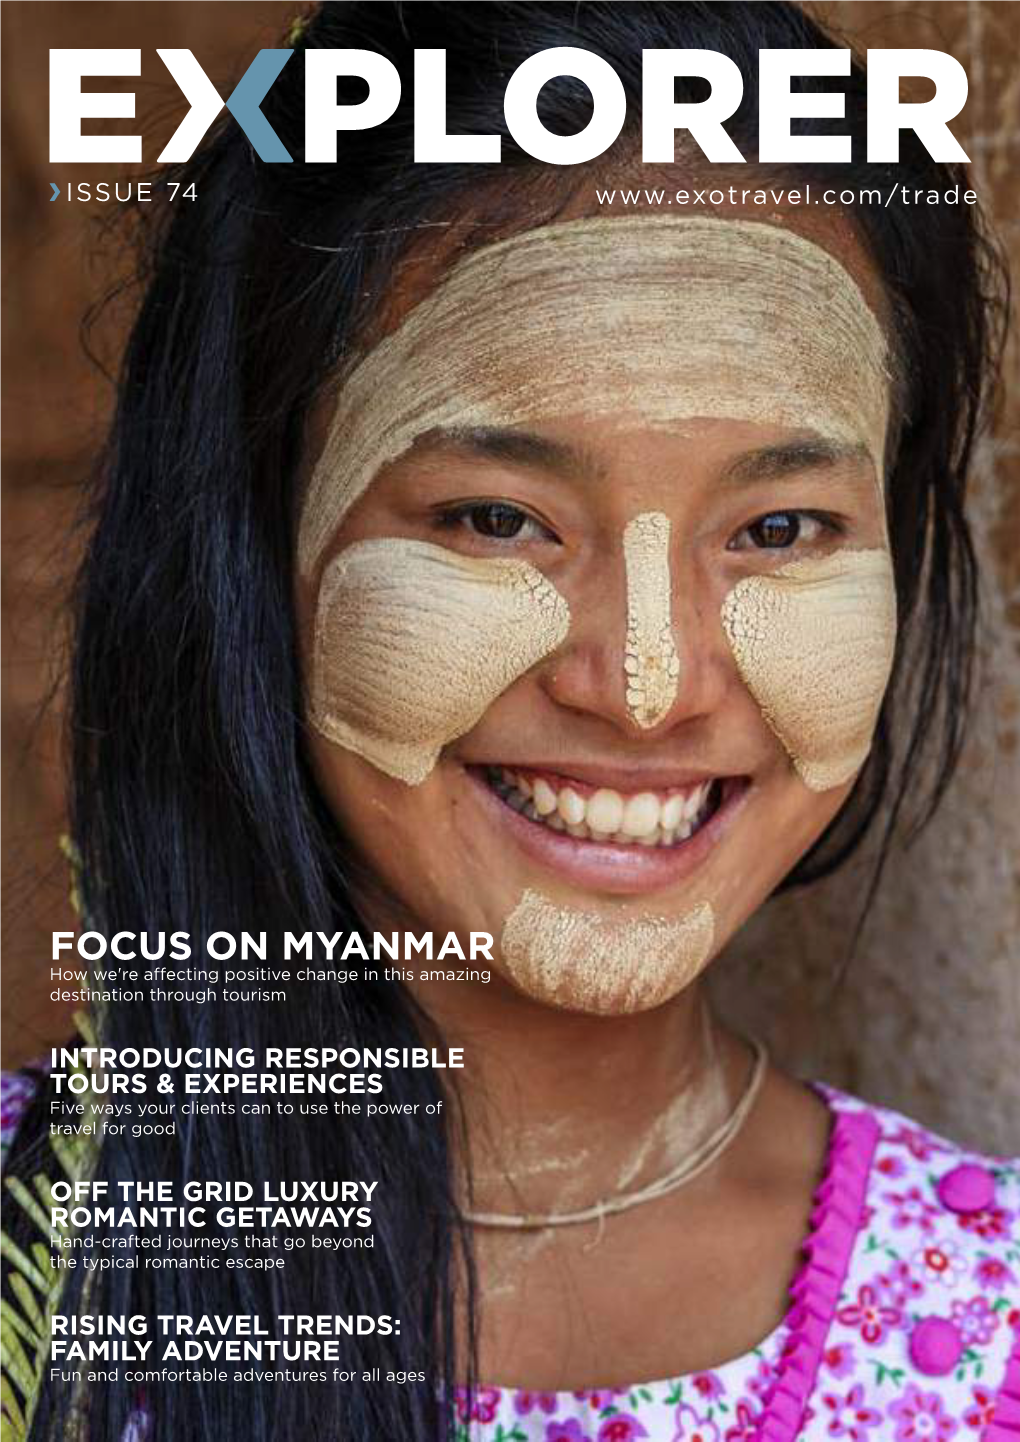 FOCUS on MYANMAR How We're Affecting Positive Change in This Amazing Destination Through Tourism